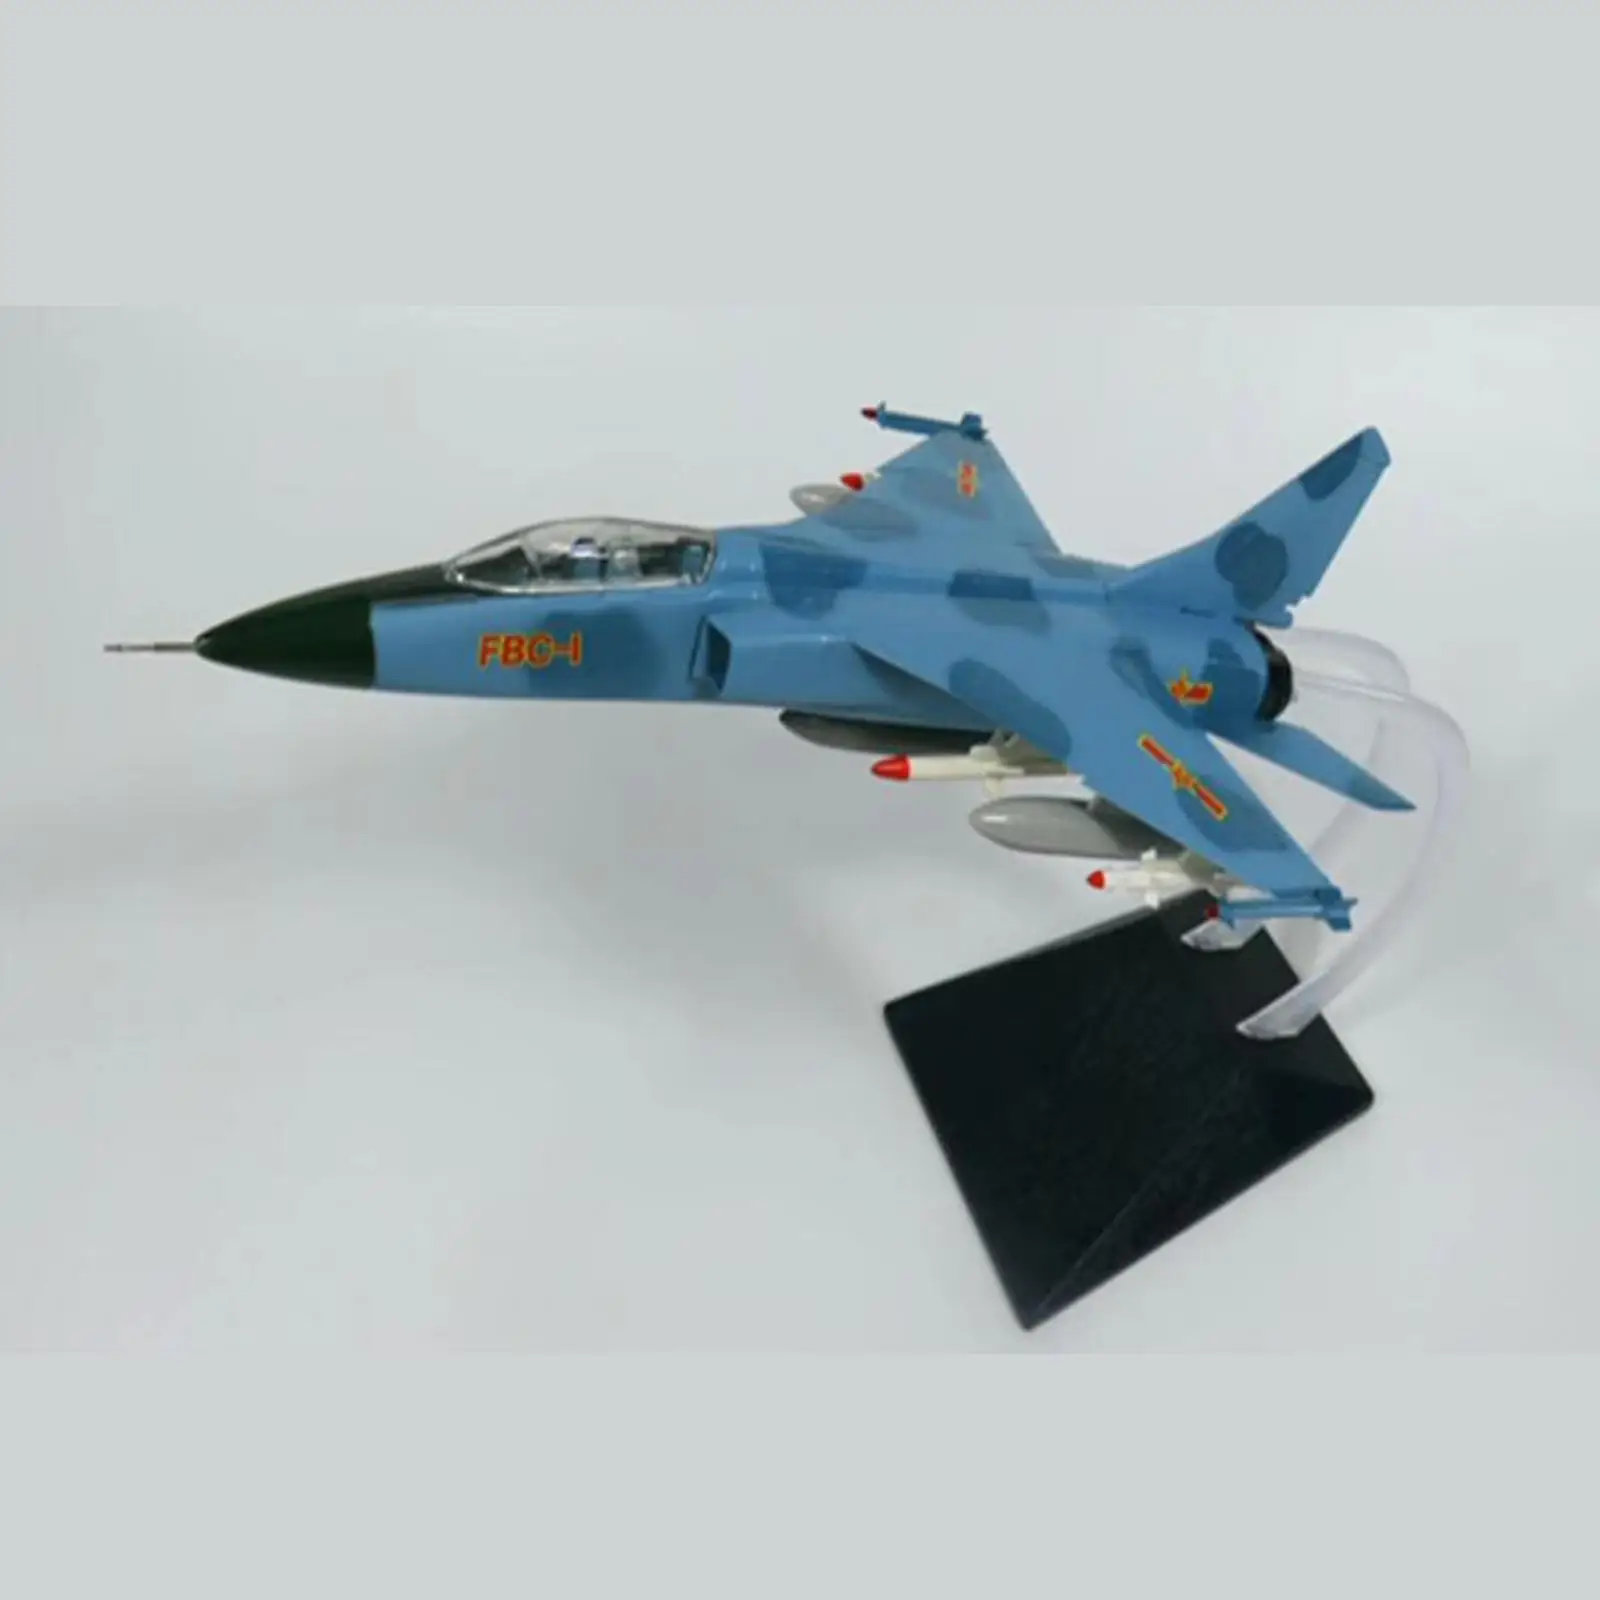 1:72 Model Airplane Collection Showcase Educational Toy Desktop Decoration Miniature Aircraft Model for Children Birthday Gifts